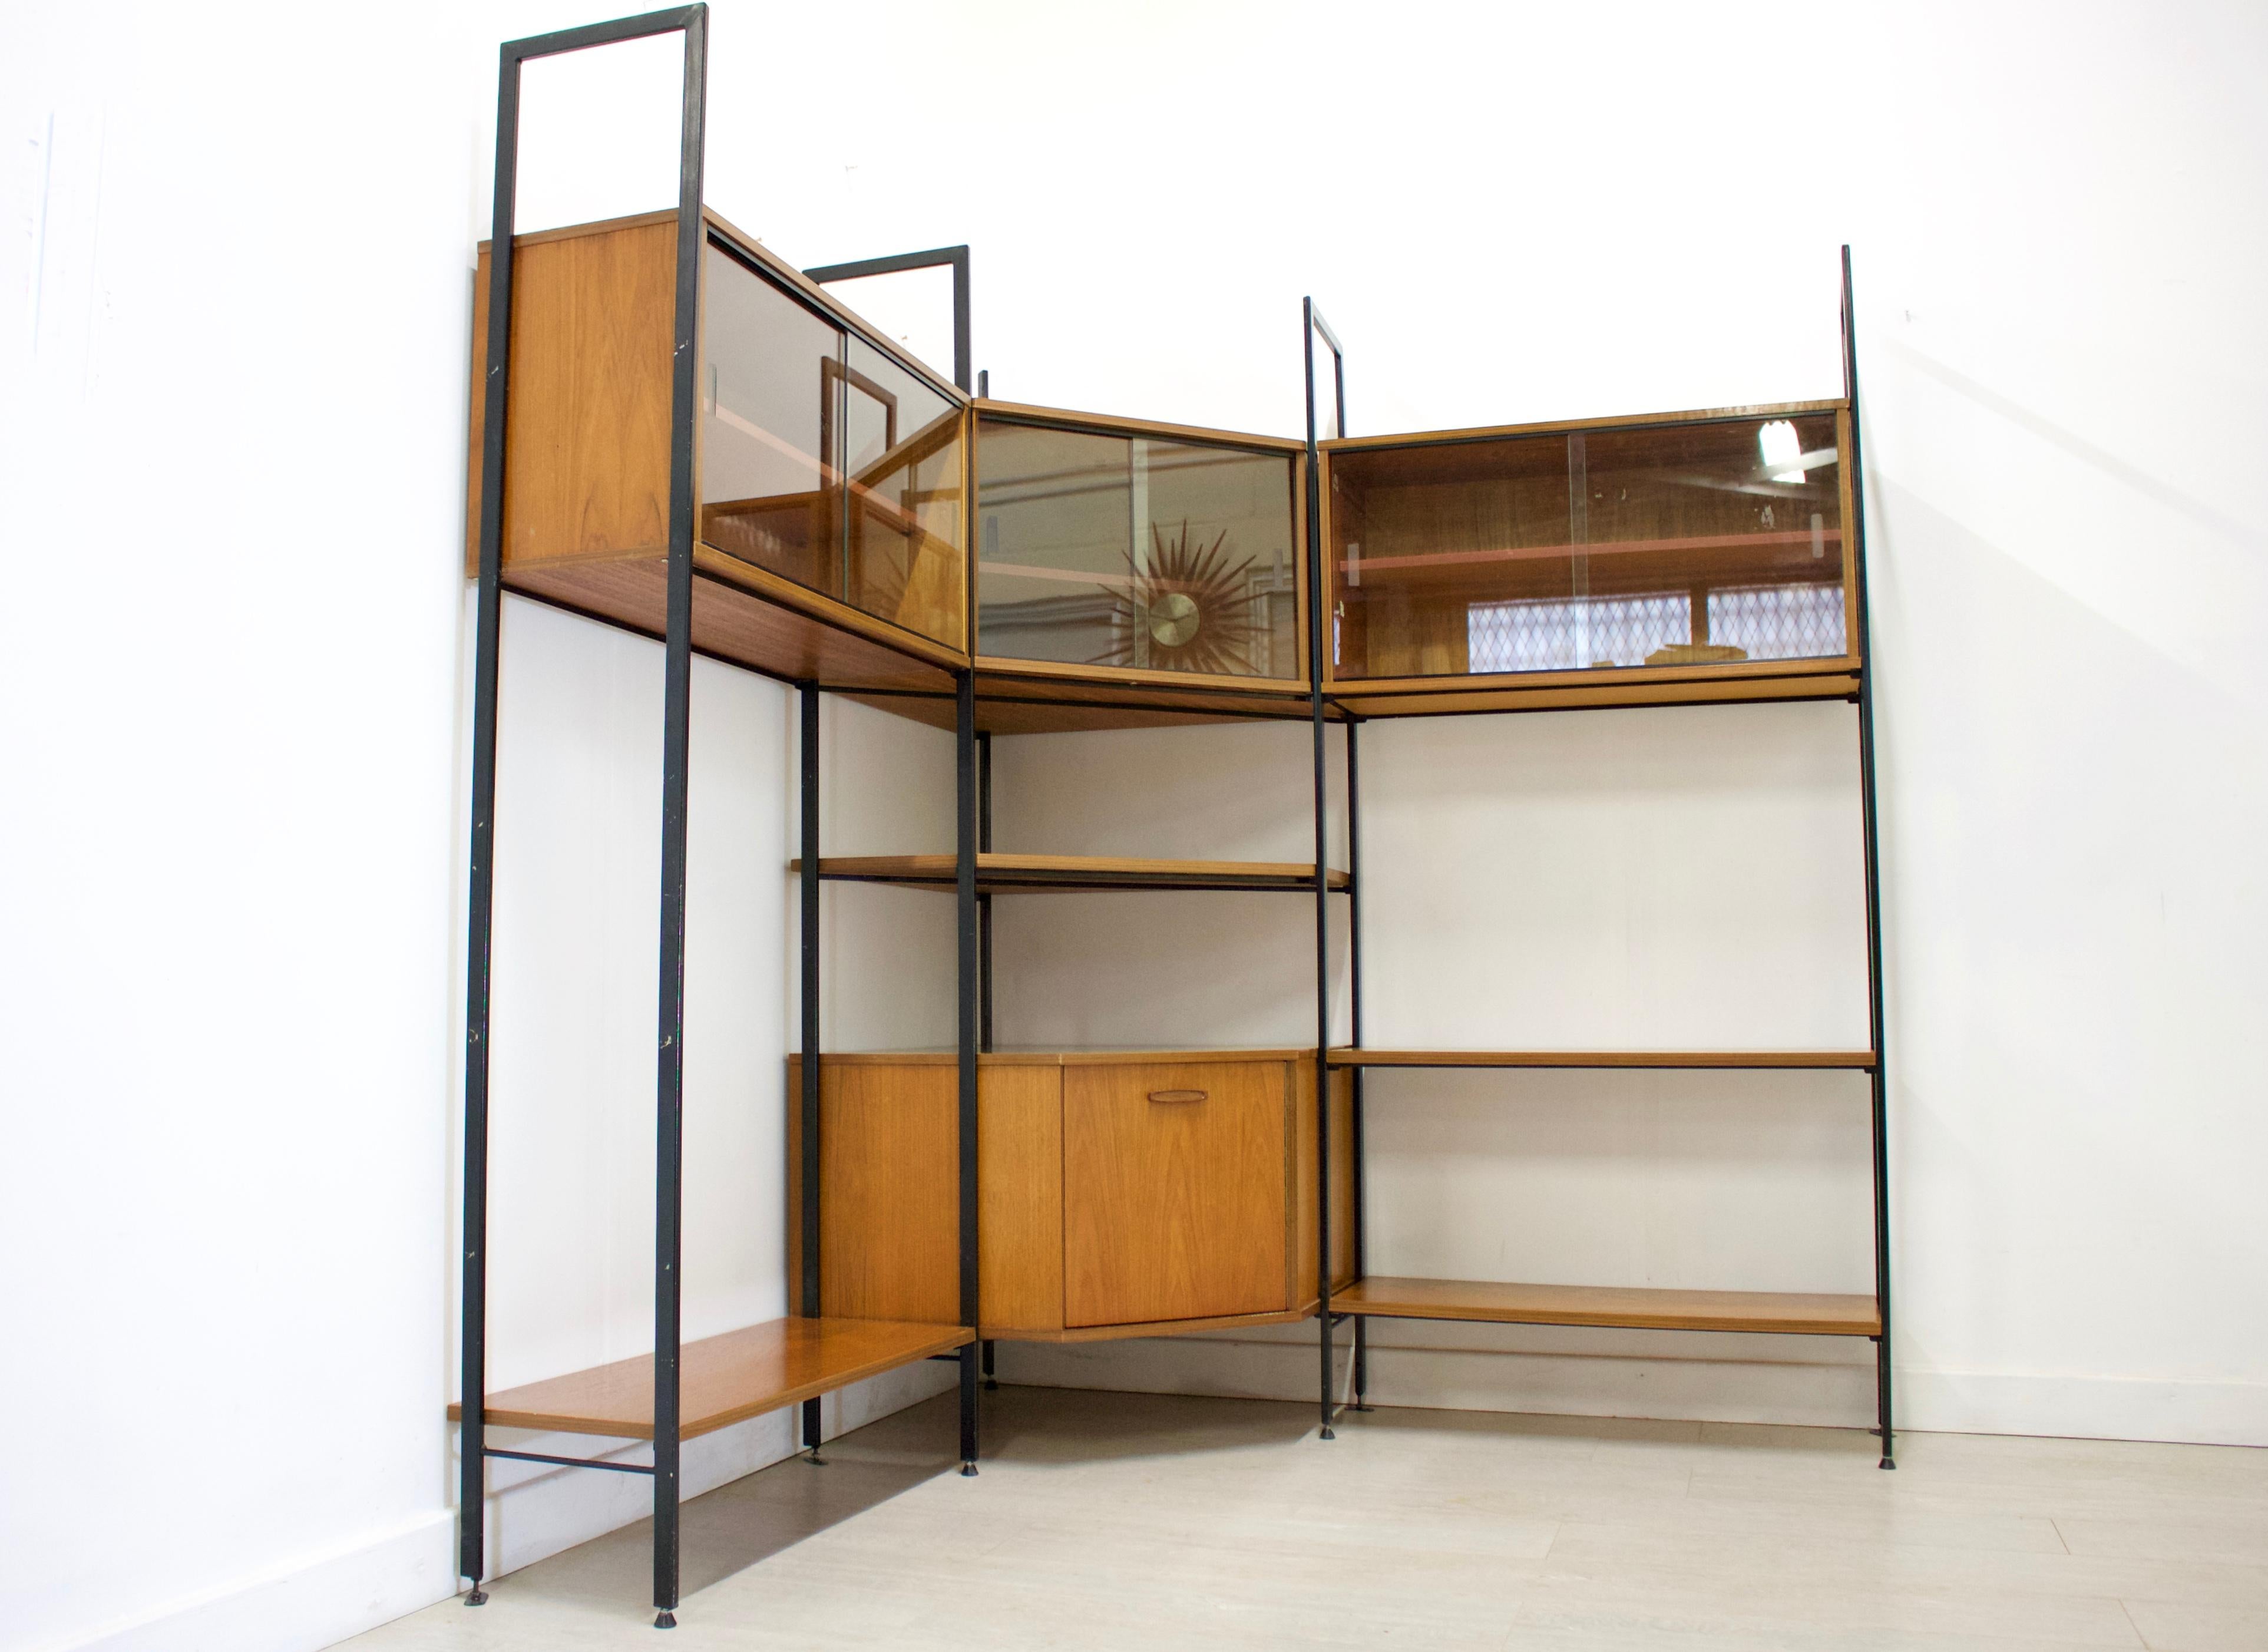 Midcentury design

- Mid-Century Modern shelving unit or wall unit
- Manufactured by Avalon in the UK
- Made from teak and teak veneer
- The individual units and shelves can have multiple configuration options
- Featuring glass sliding doors